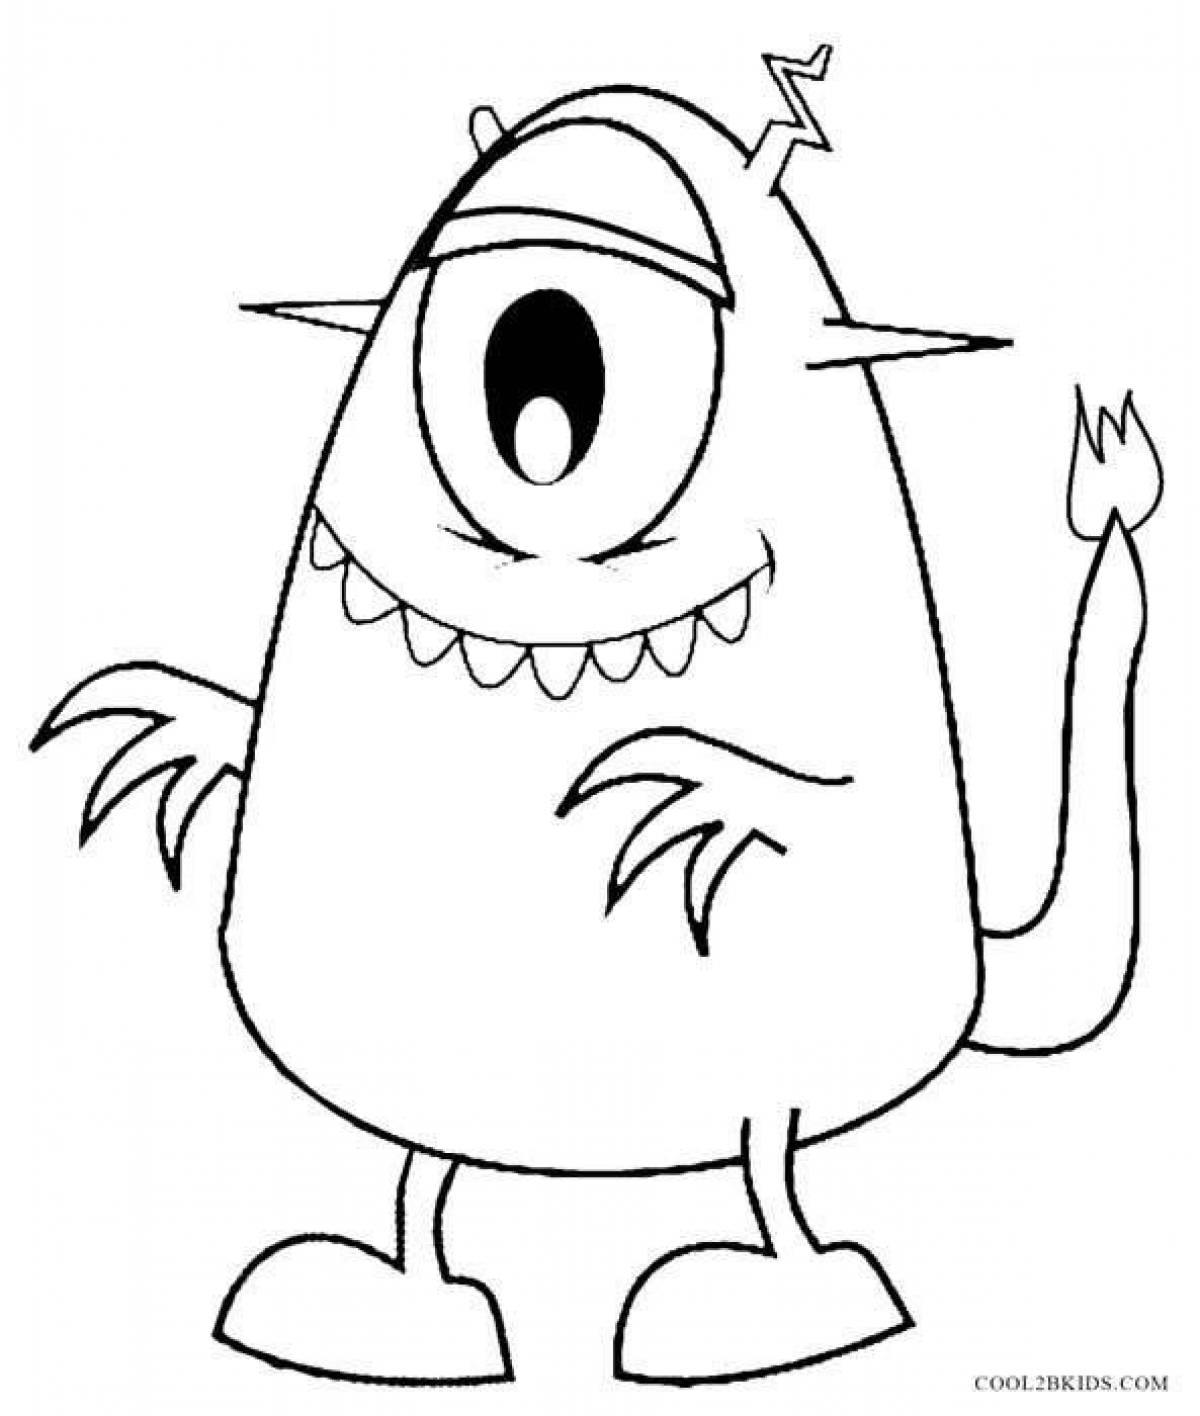 Disgusting monsters coloring pages